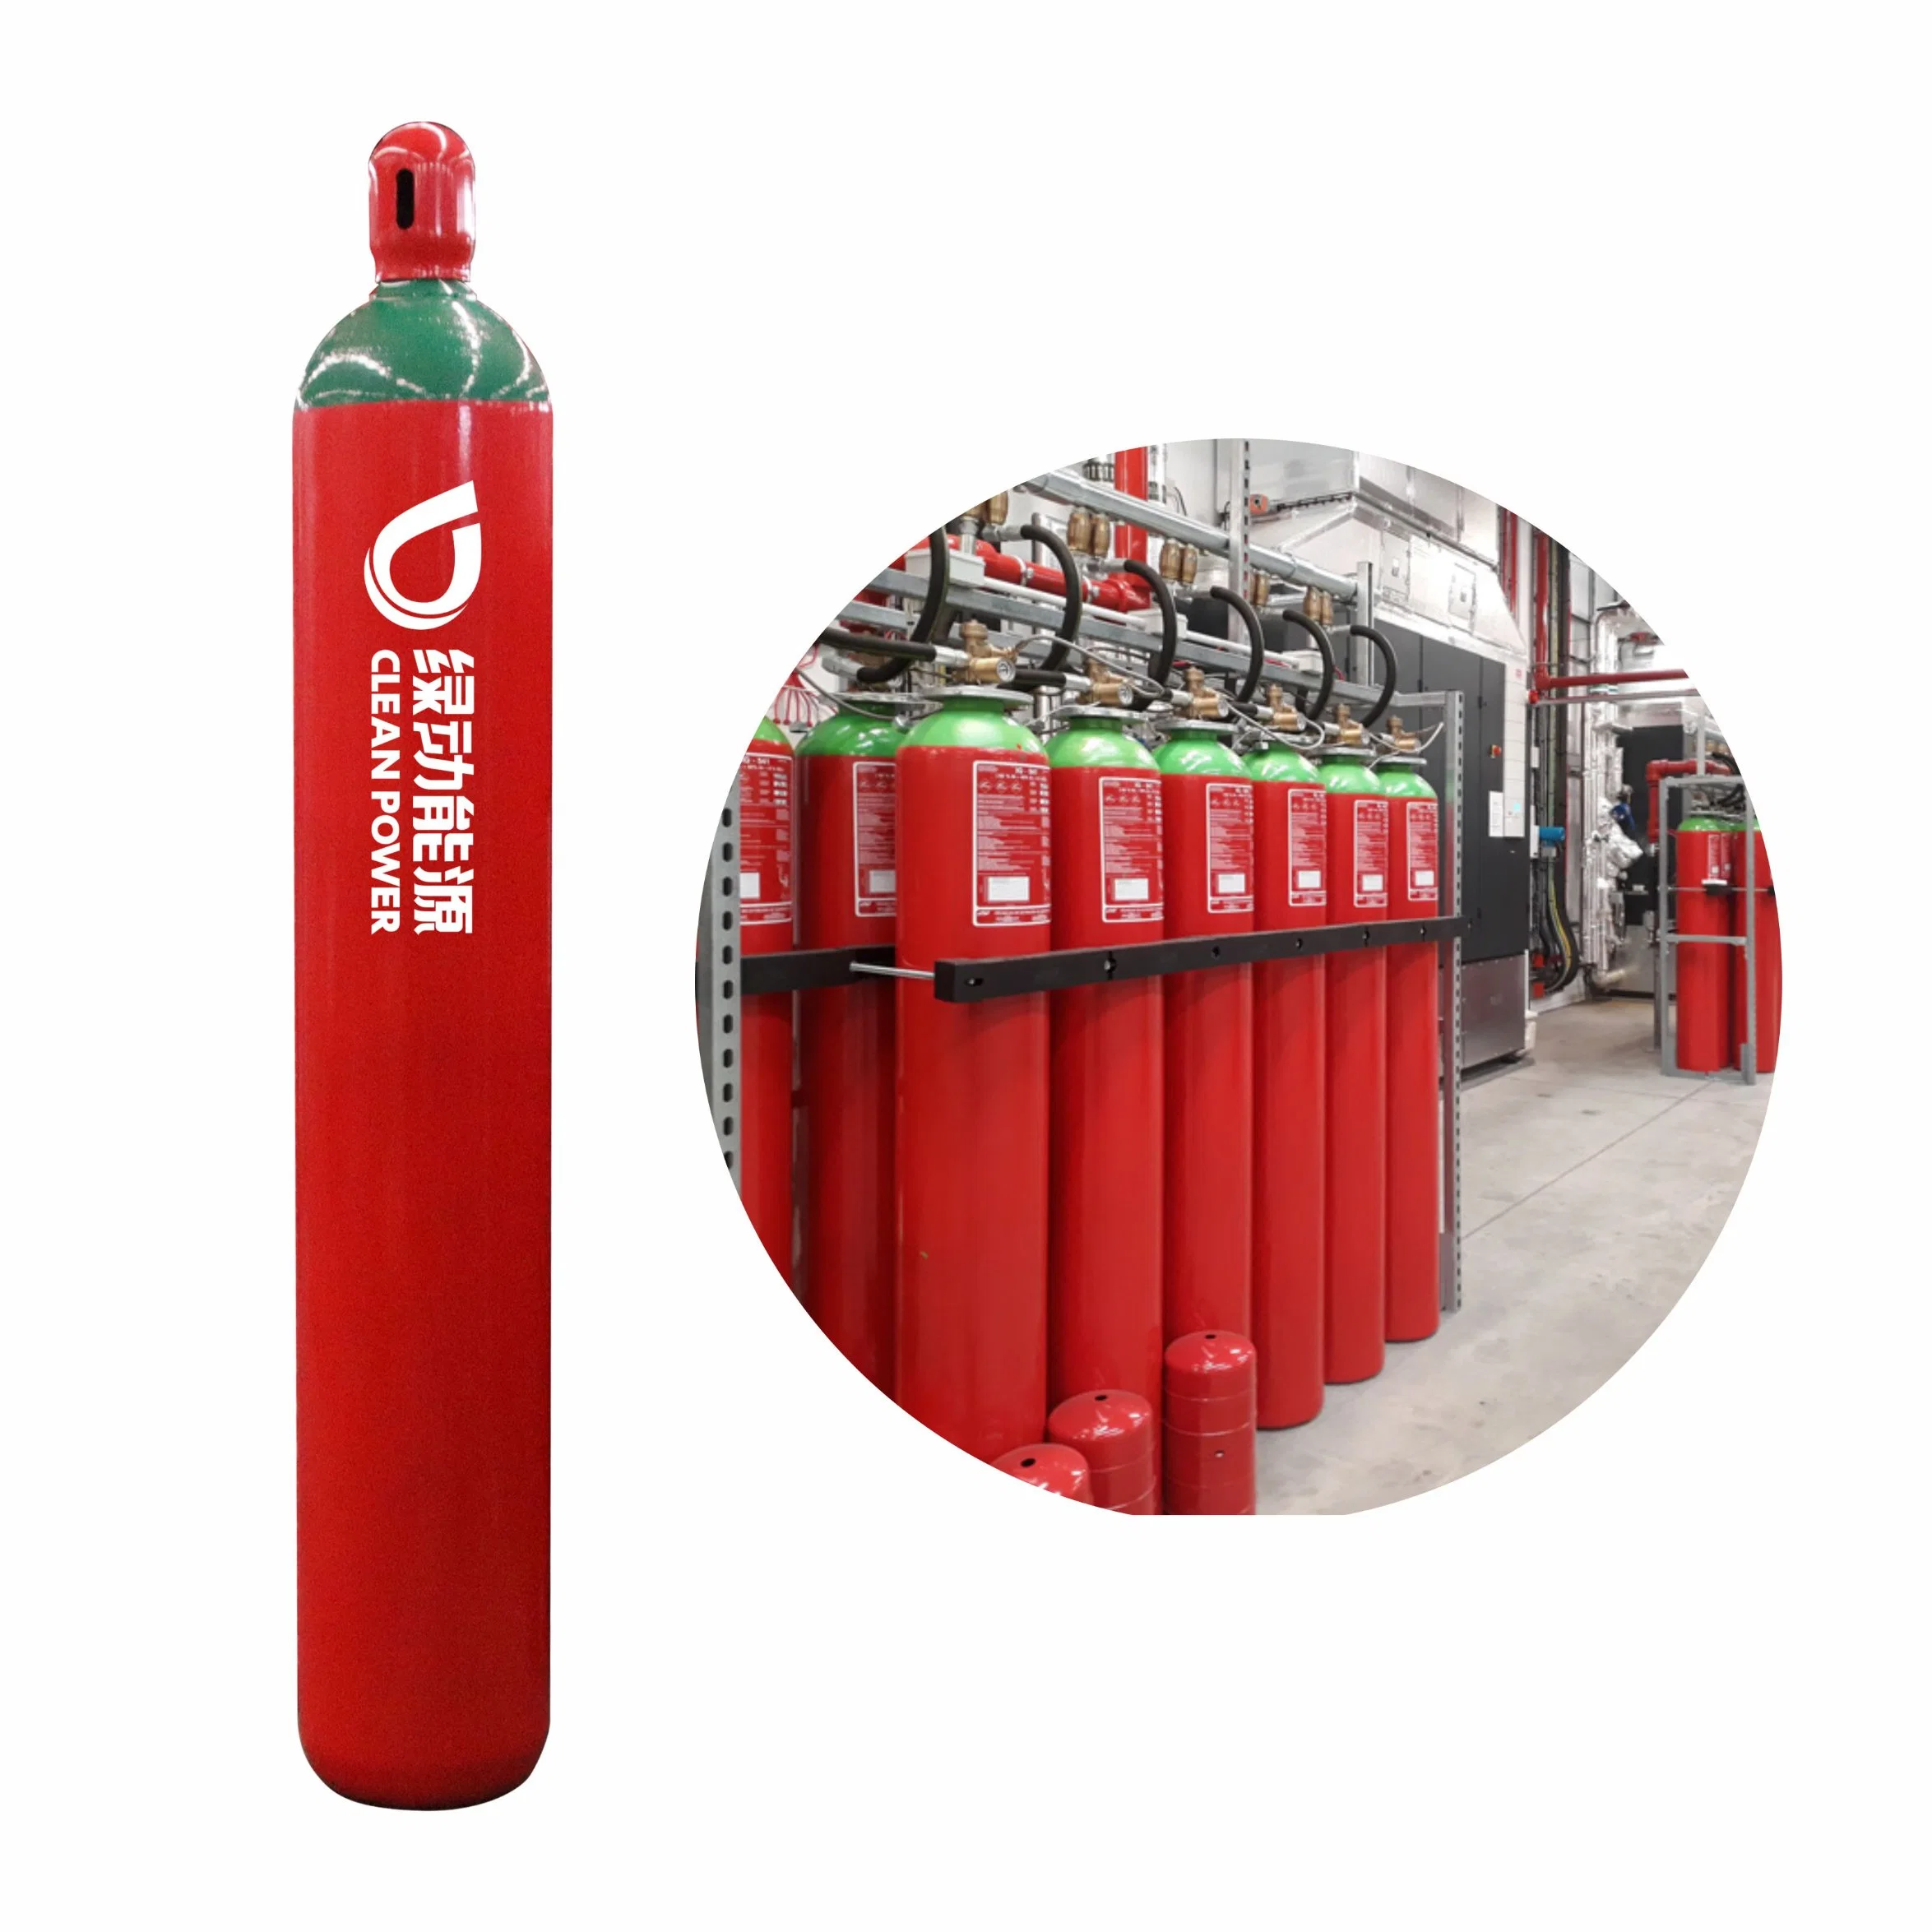 Ld Brand Tped Fire Fighting Safety Equipment CO2 Gas Cylinder